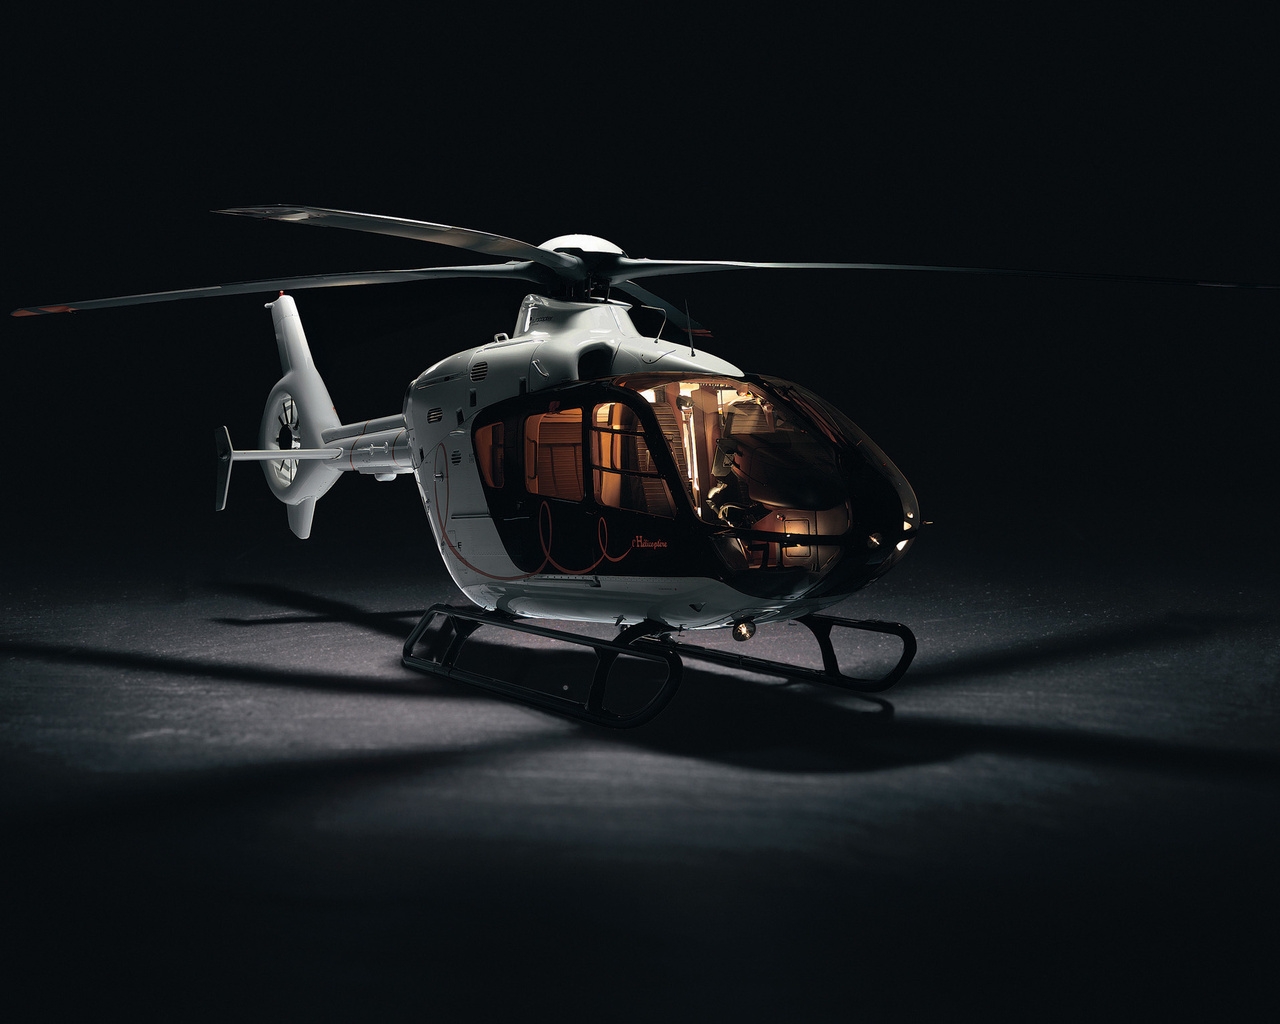 Eurocopter EC135 Helicopter for 1280 x 1024 resolution